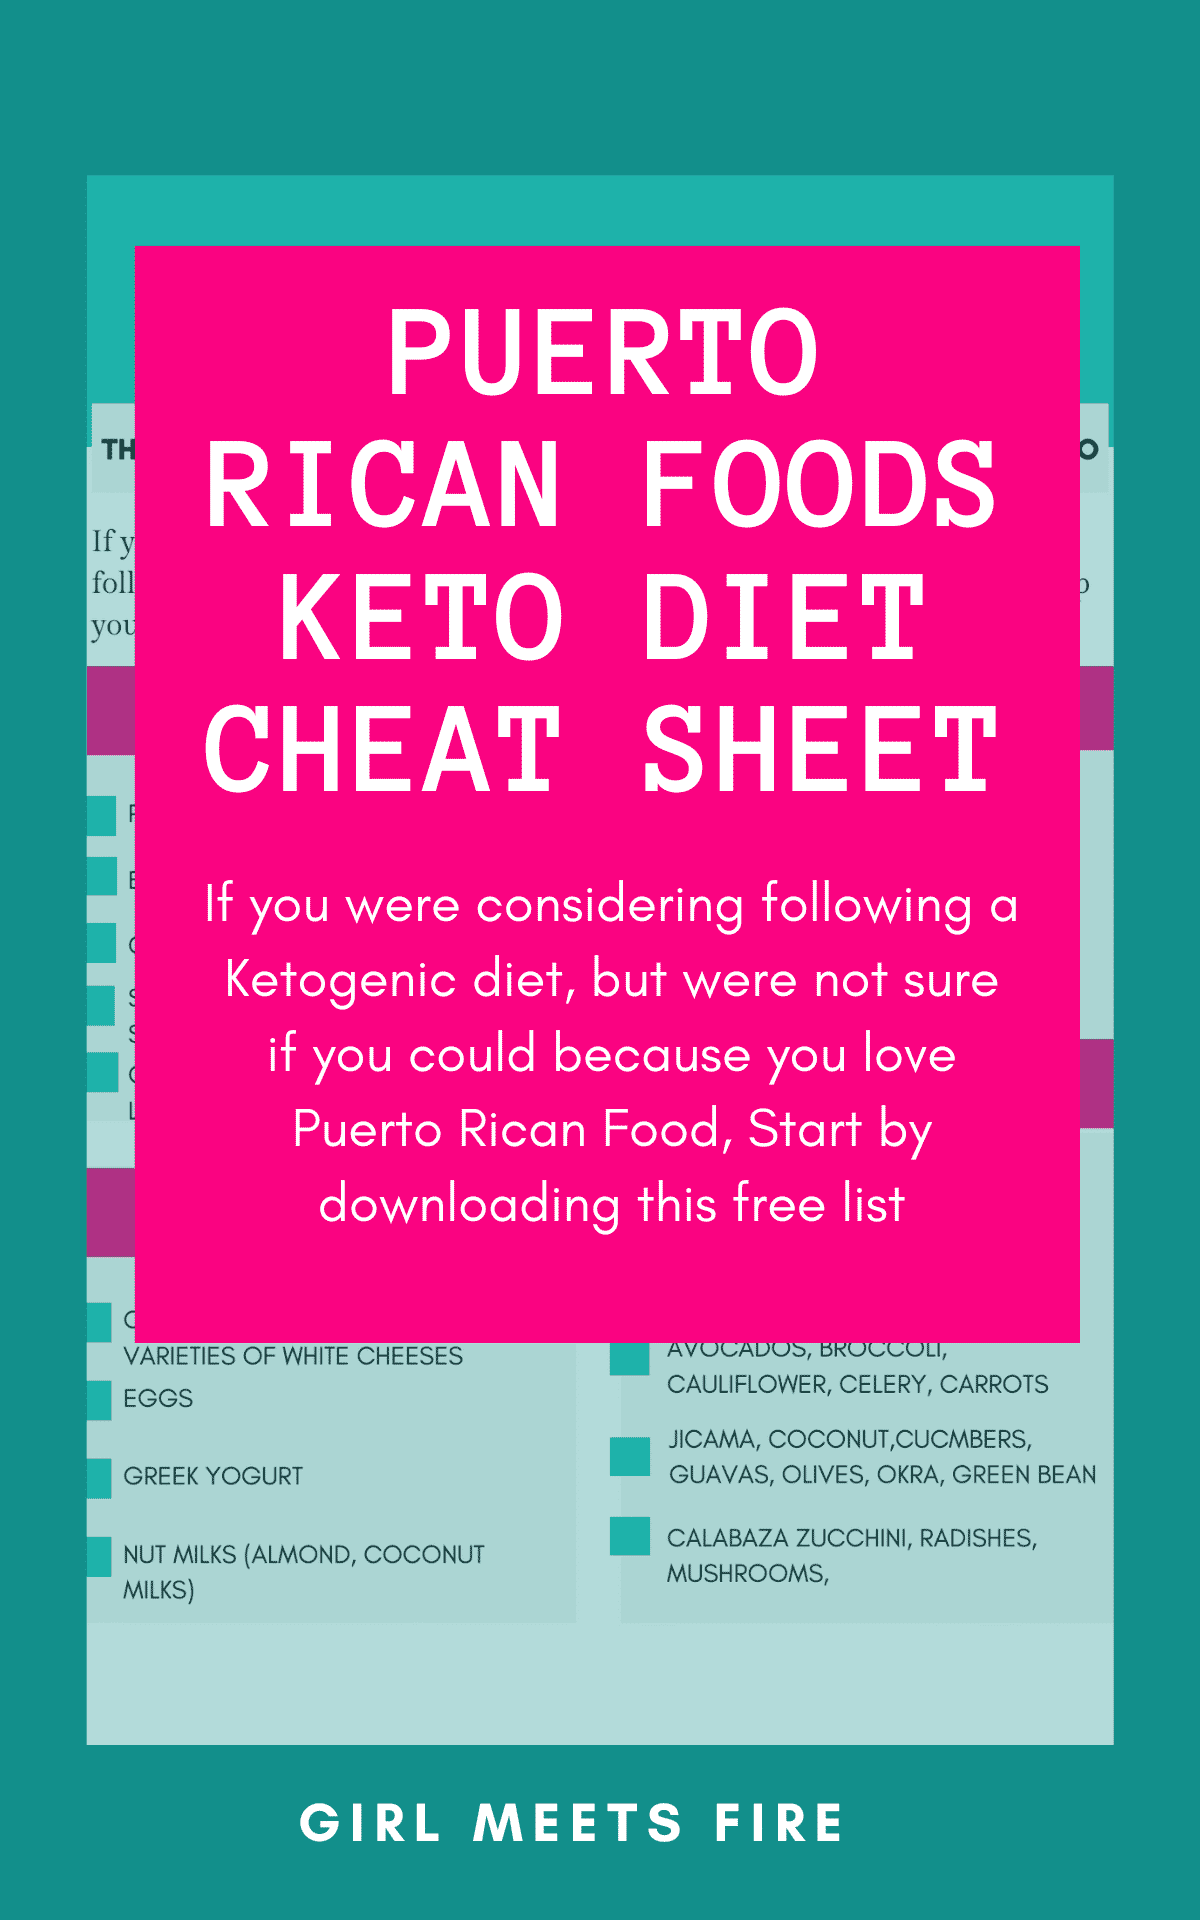 Link to download the my Puerto Rican Foods Keto Cheat Sheet